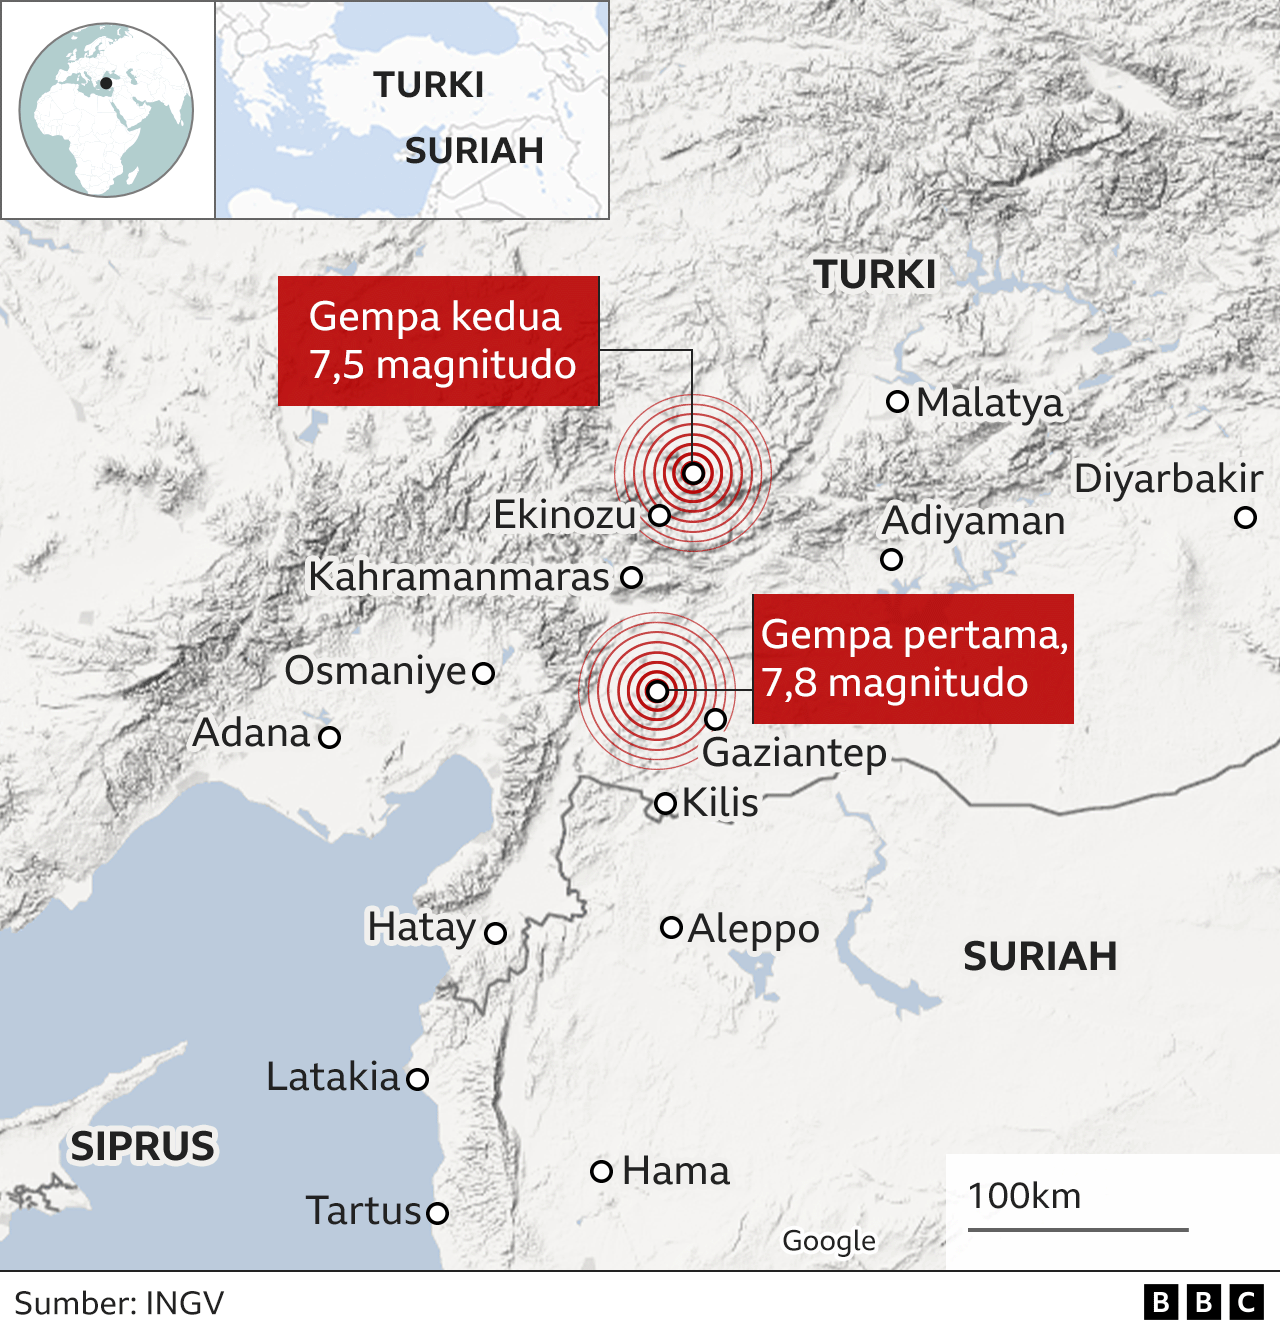 _128535908_turkey_two_earthquakes_locator_map_indonesian_640-nc-2x-nc.png (1280×1332)